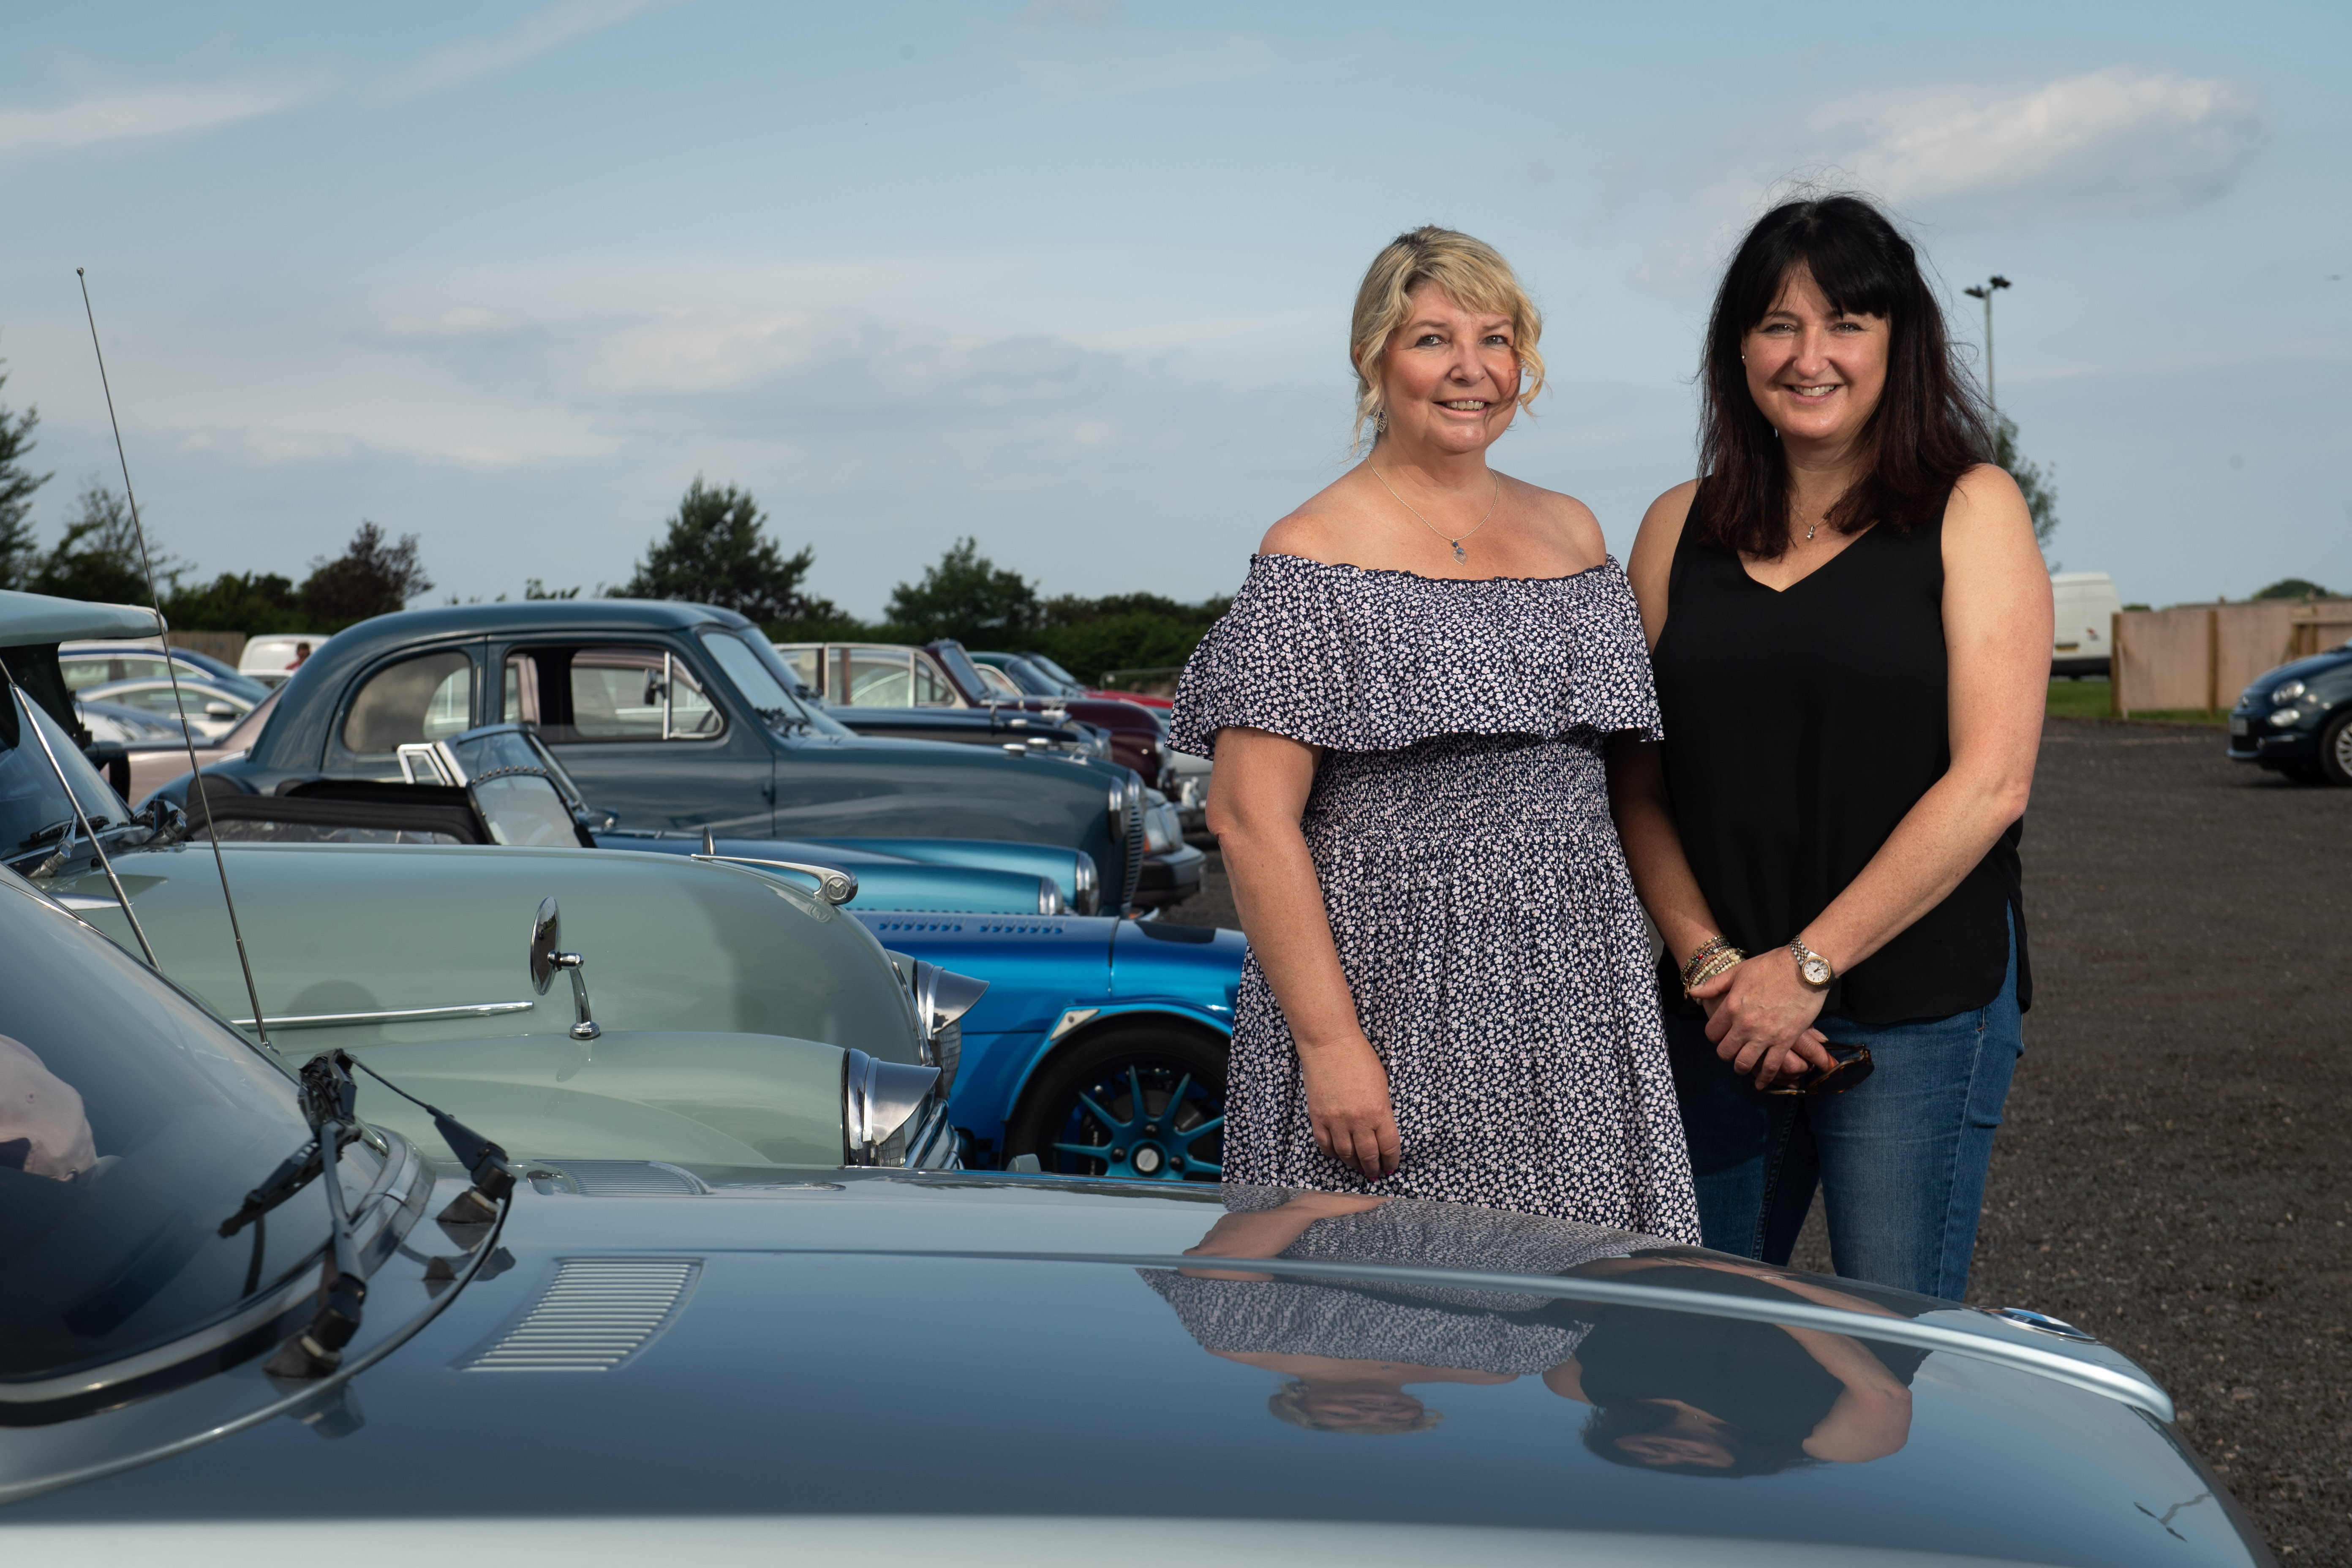 Event organisers Tracy Stellar and Julie Muir organise Clan Cancer Support's annual classic car cavalcade in Moray.